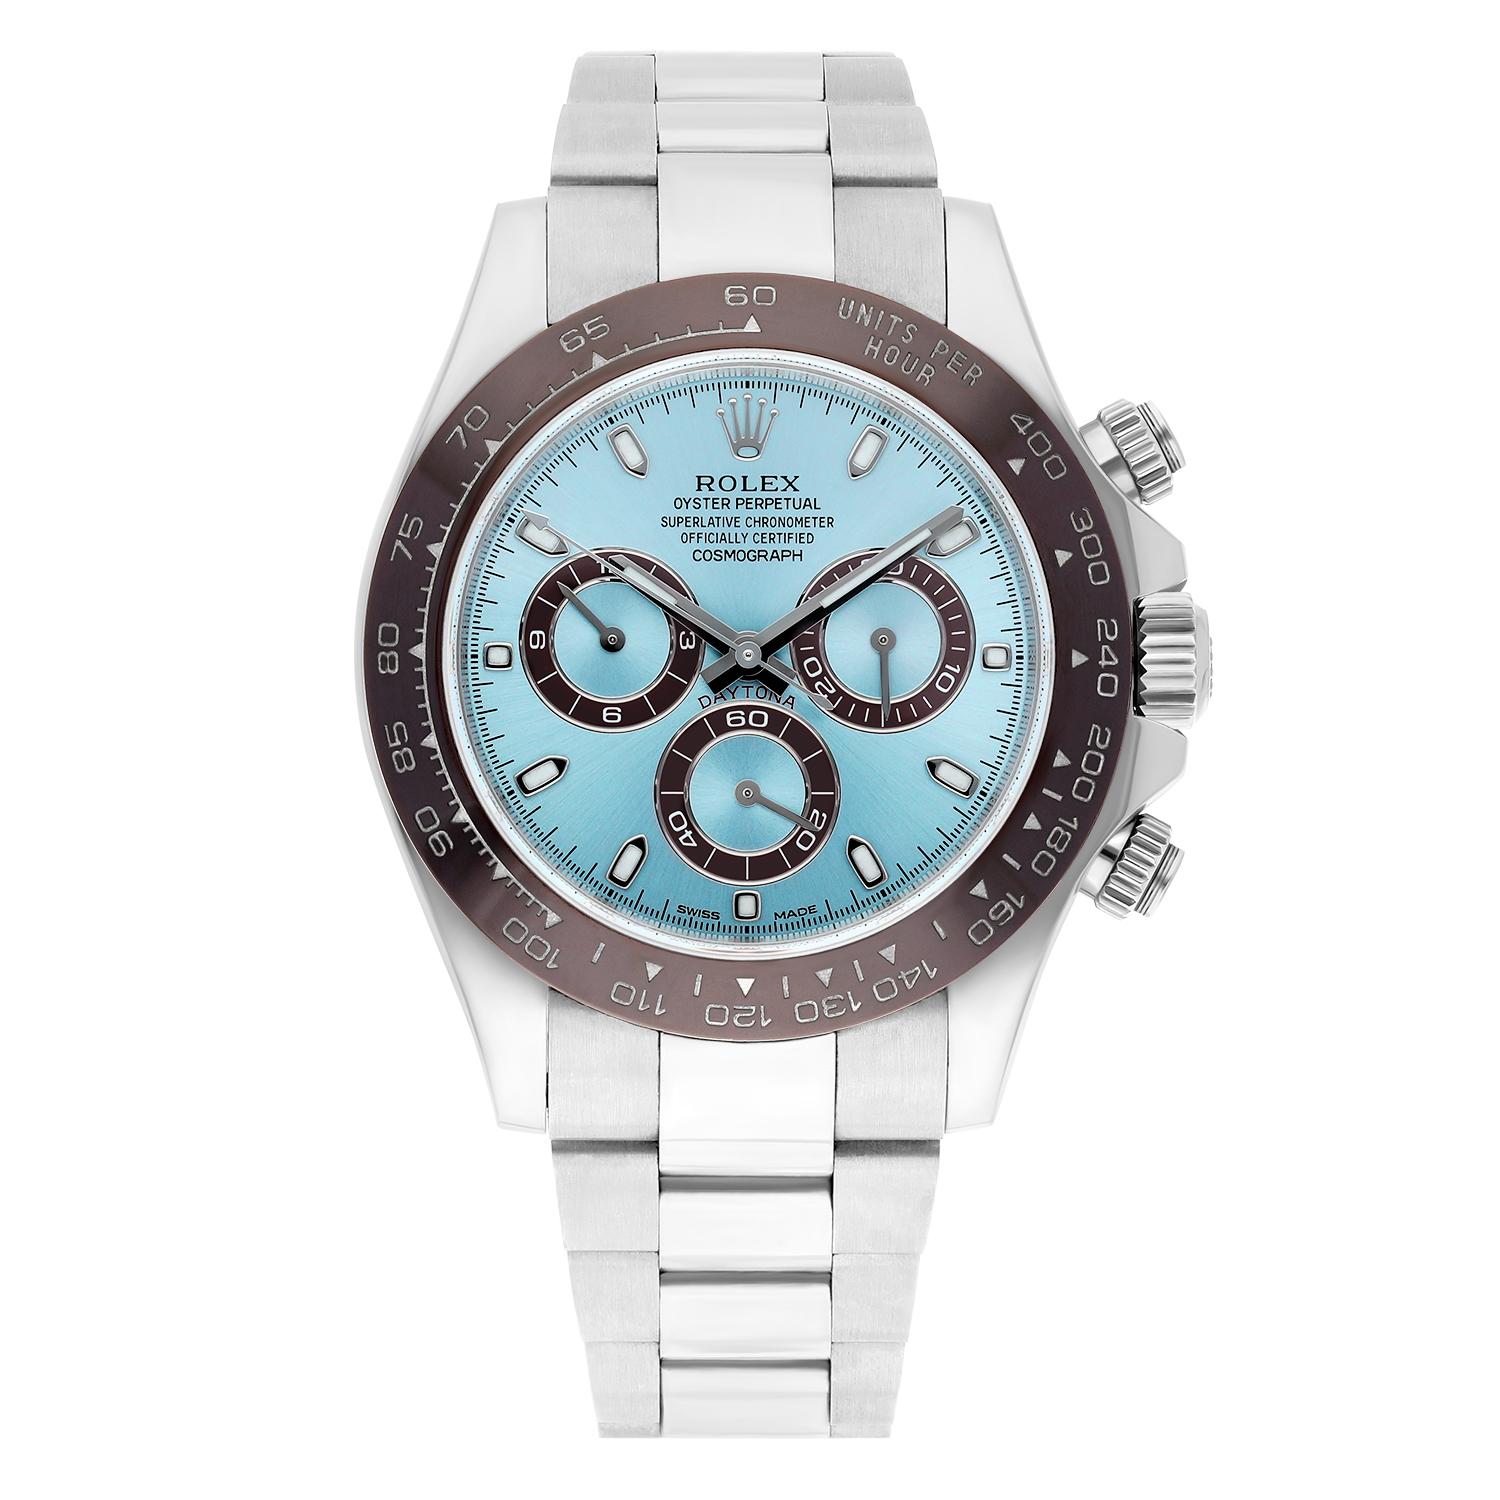 This Rolex Cosmograph Daytona wristwatch is a luxurious and sporty accessory perfect for men who appreciate high-end timepieces. Made of platinum, the watch features a silver case color, fixed bezel type with tachymeter, and a blue glacier dial